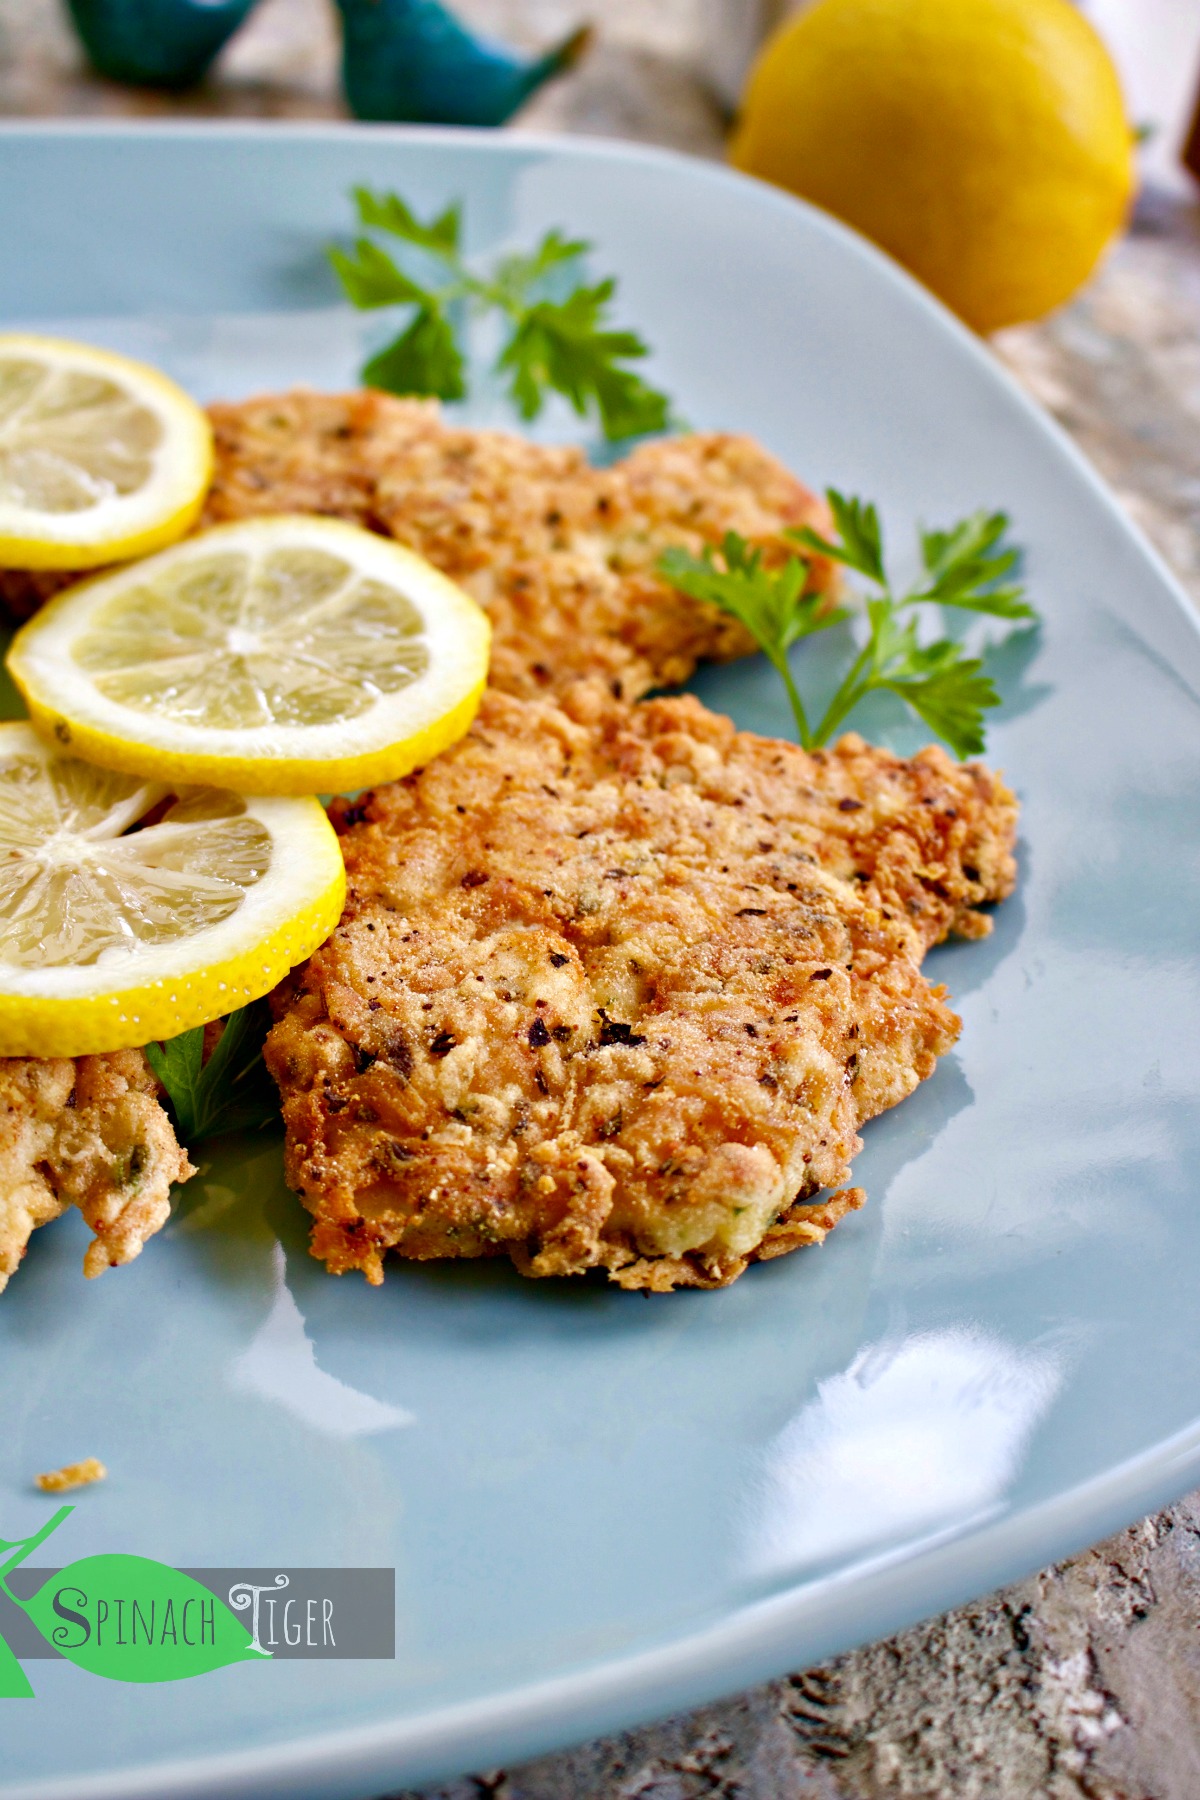 How to Make gluten free Italian Chicken Cutlets from Spinach Tiger